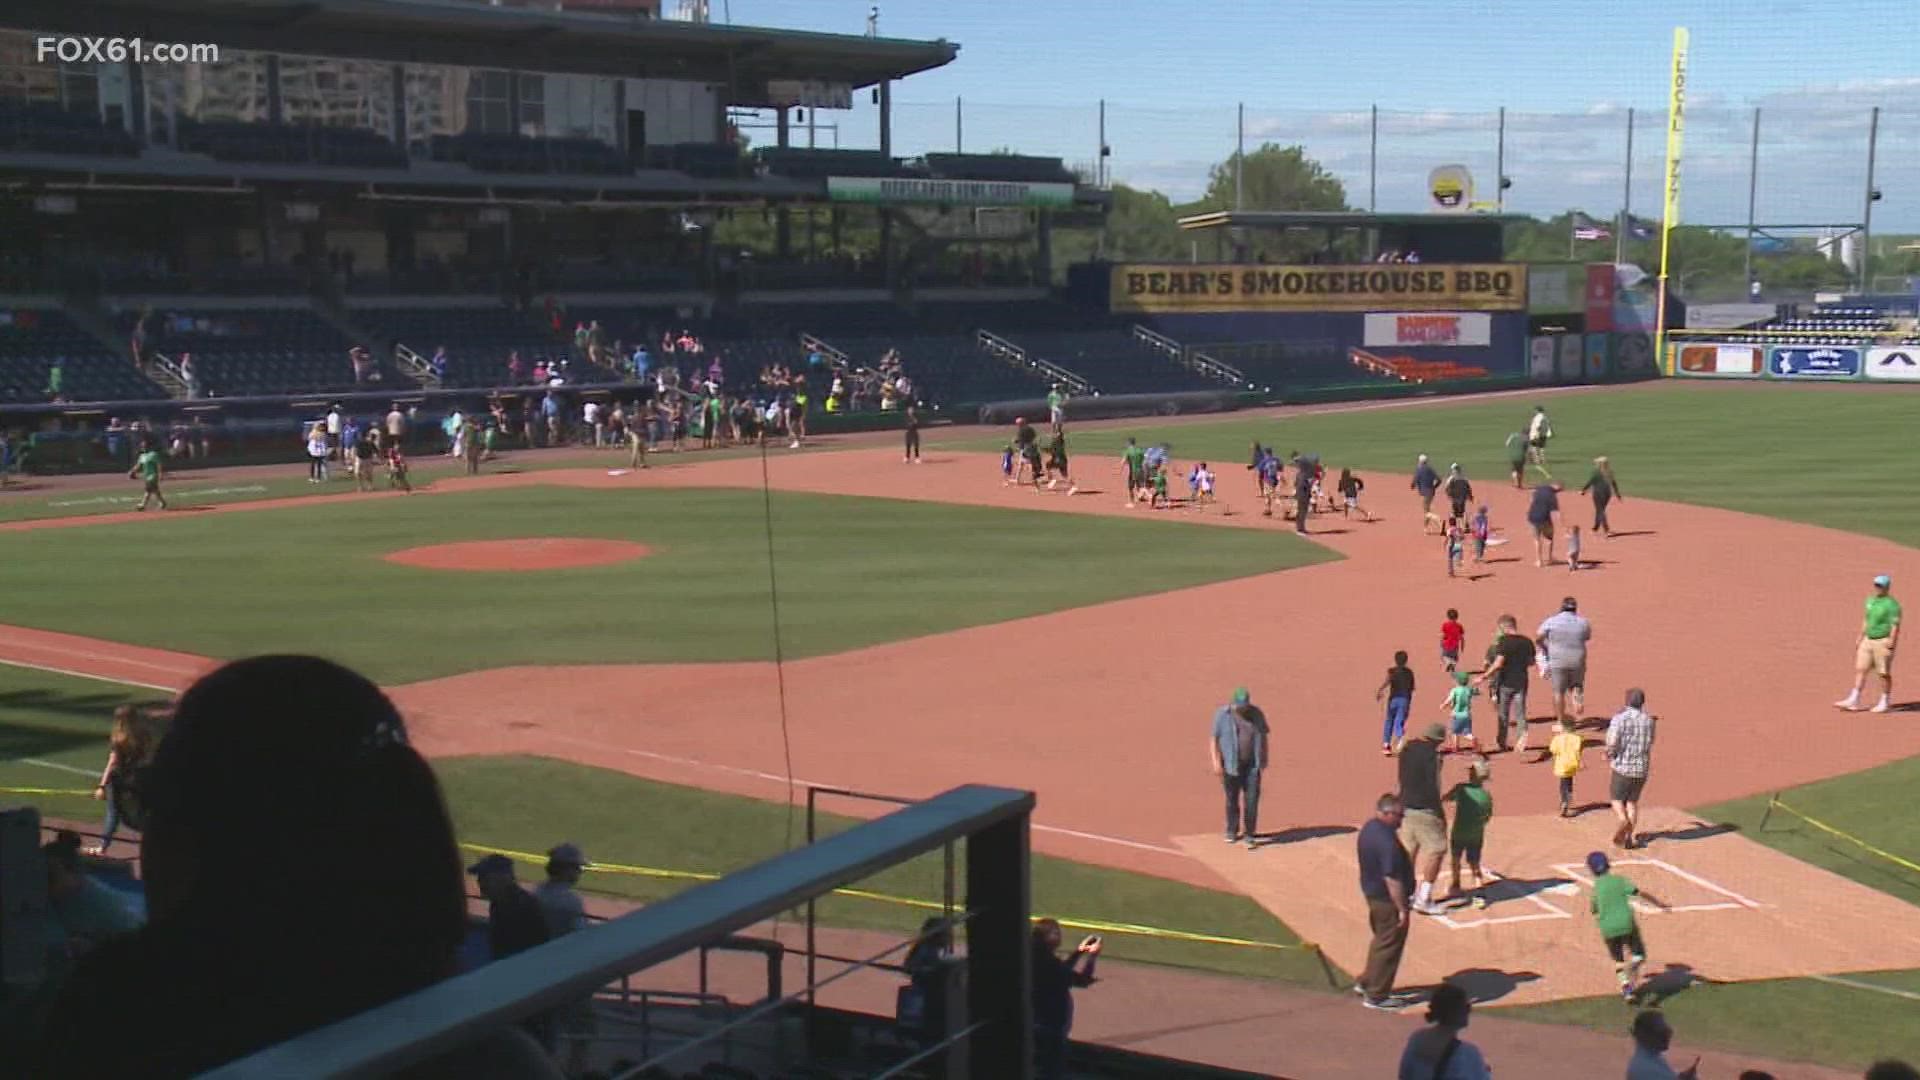 Connecticut families headed to Dunkin' Donuts Park Sunday for a Father's Day baseball game. Dads say it means "the world" to celebrate with their kids.